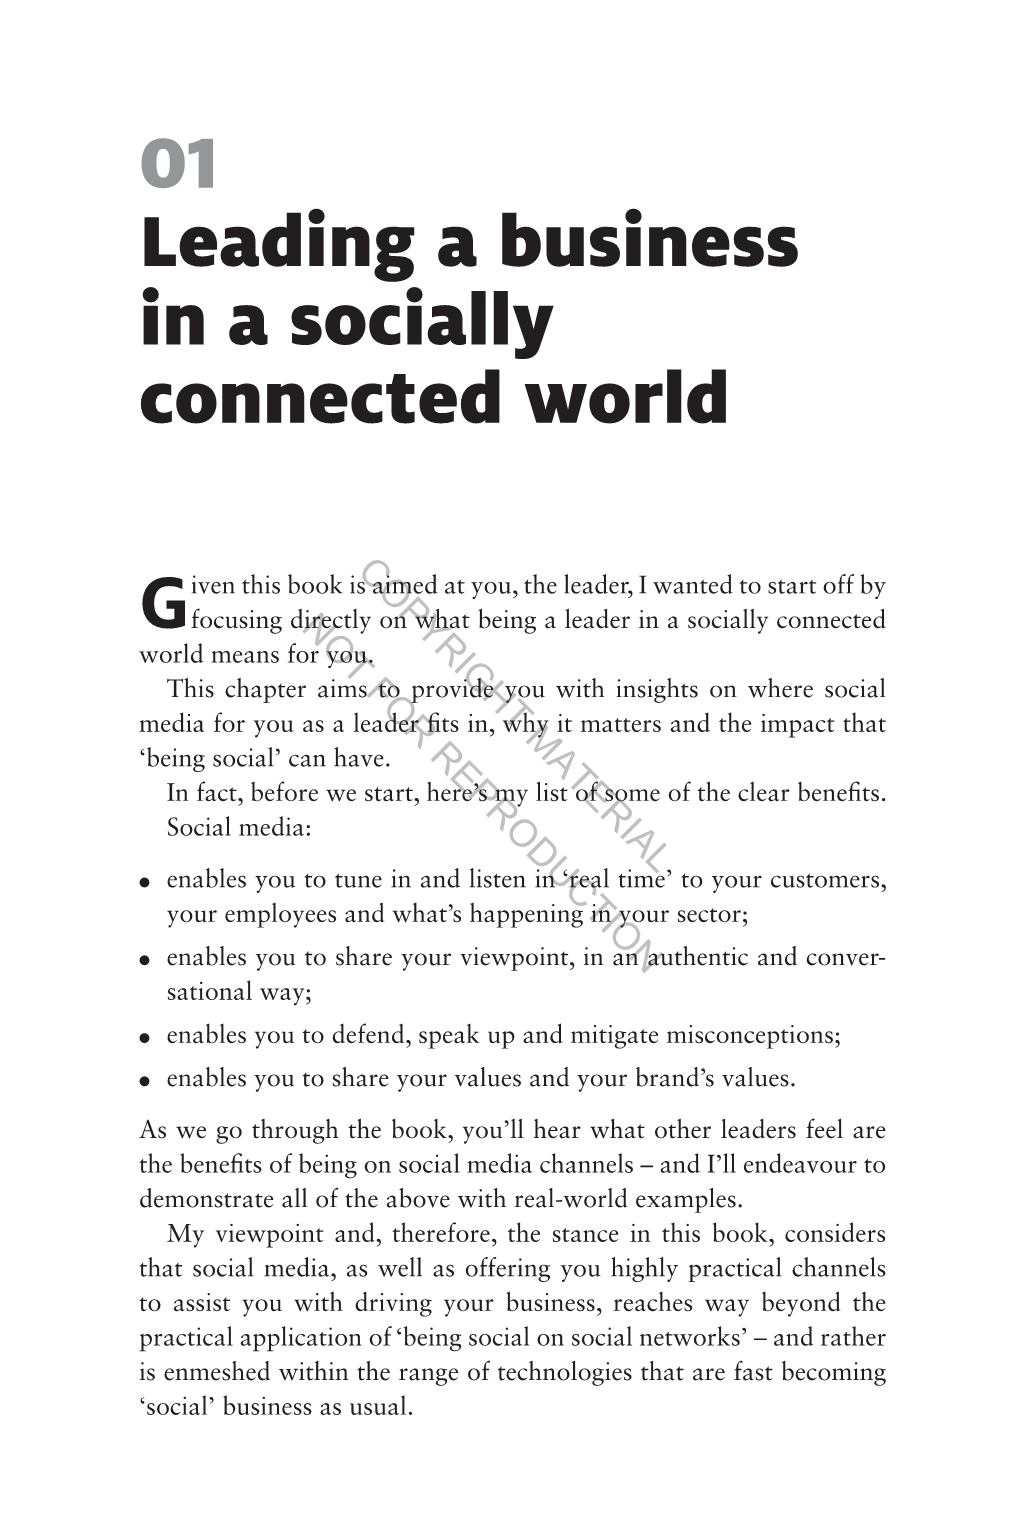 01 Leading a Business in a Socially Connected World